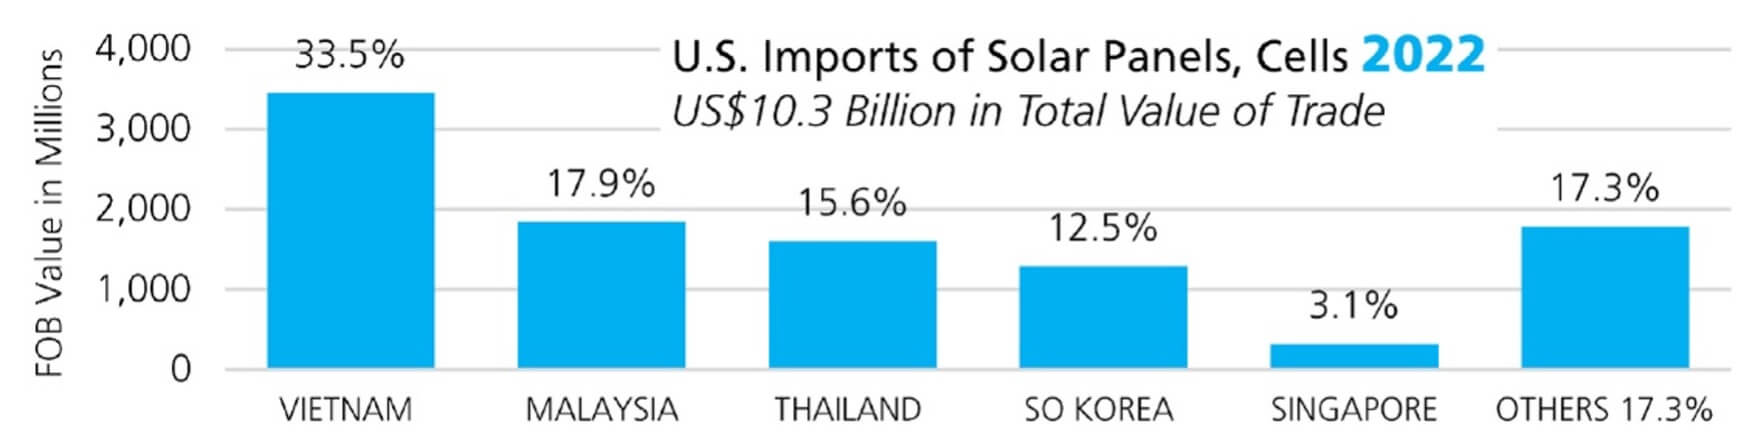 Descartes Datamyne global trade data showing post pandemic U.S. imports of solar panels in 2022